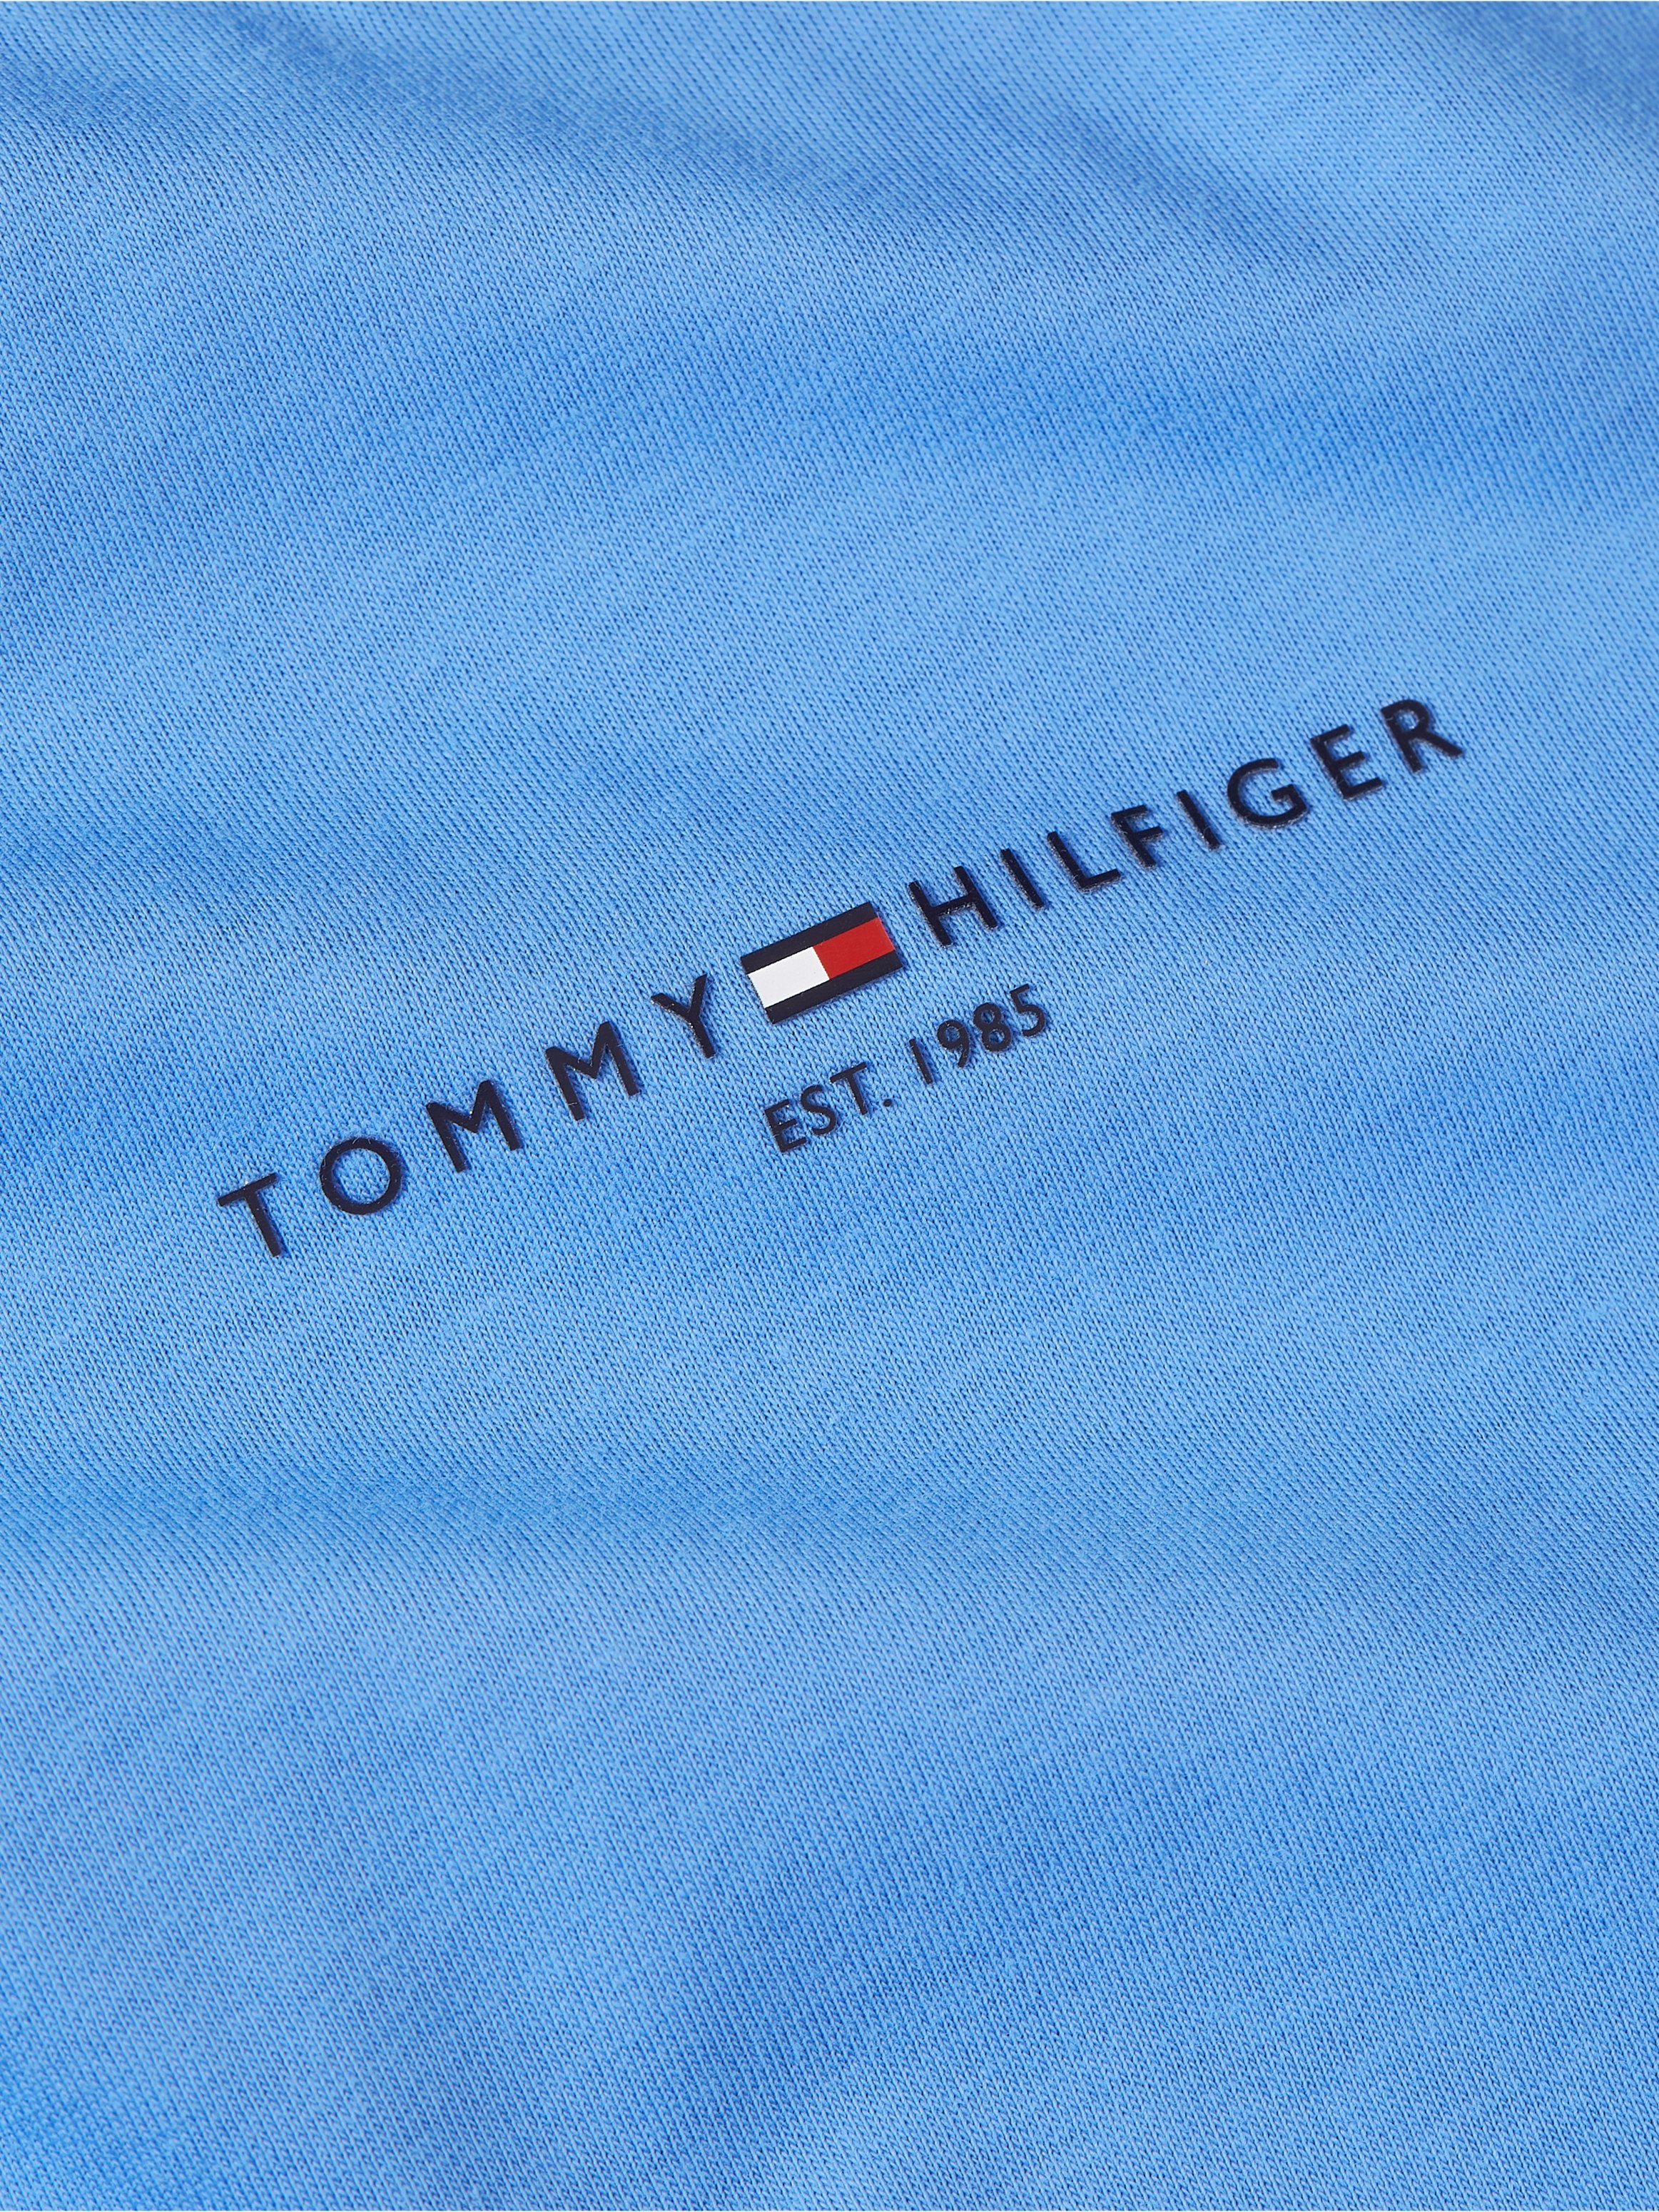 Tommy Hilfiger T-Shirt LOGO TIPPED TOMMY blue TEE spell